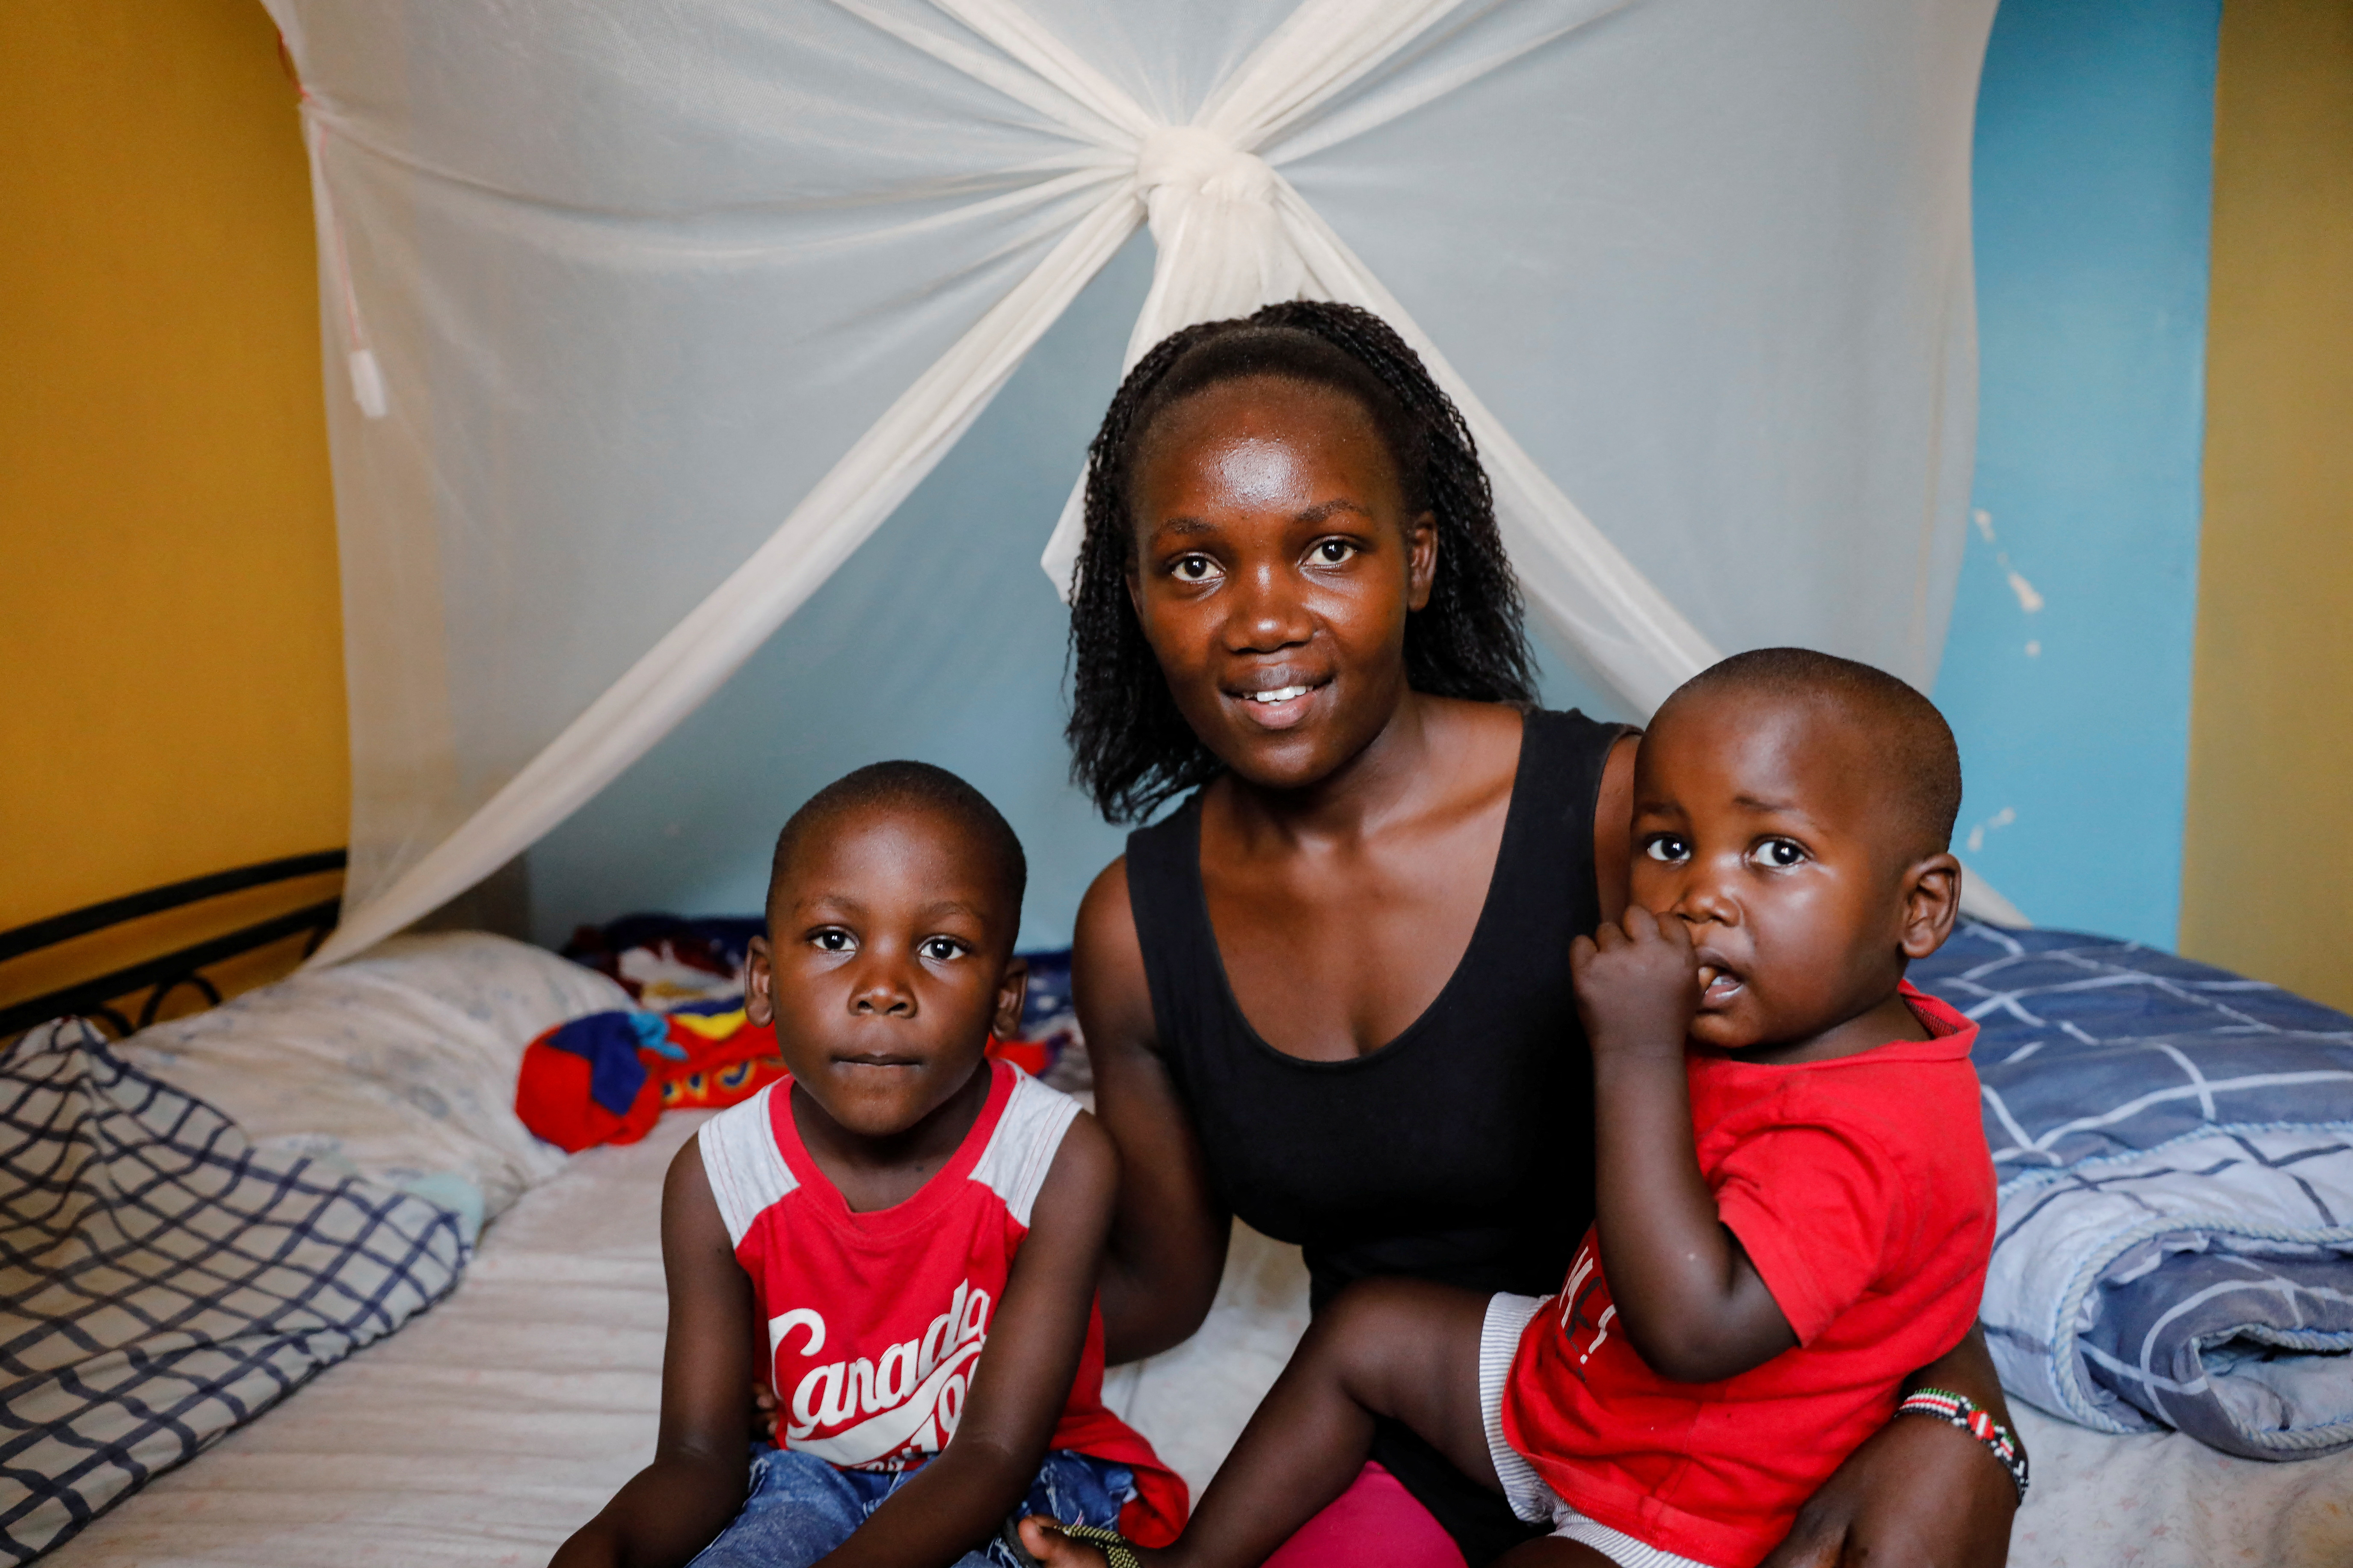 Rebecca Adhiamba Kwanya poses for a photo with her sons Betrun and Bradley at their home in Kisumu